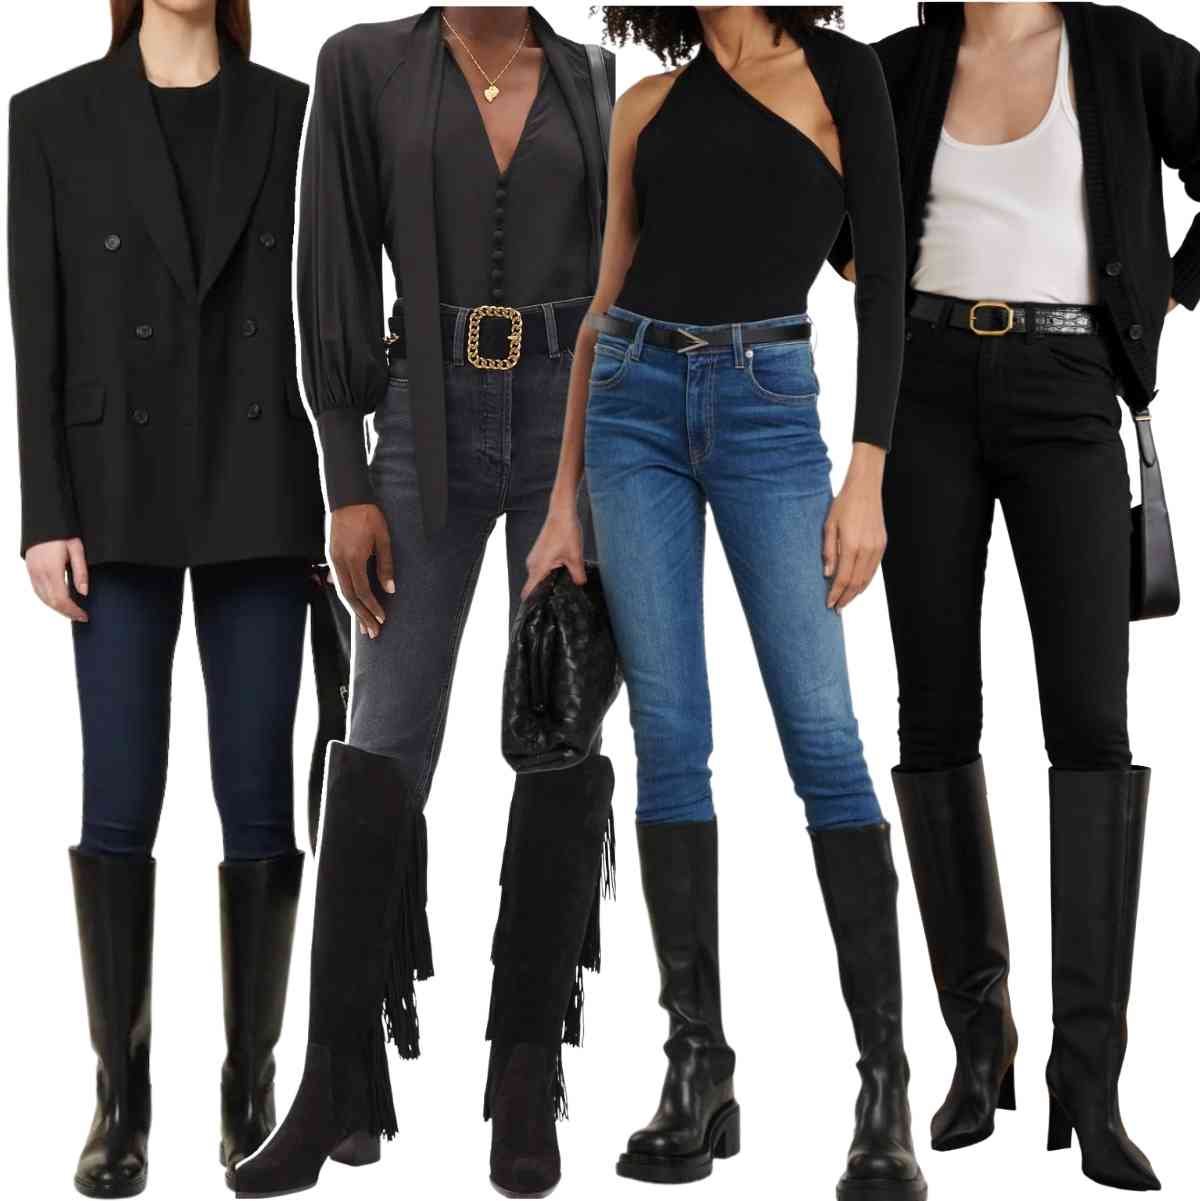 Collage of 4 women wearing different knee high boots with skinny jeans.